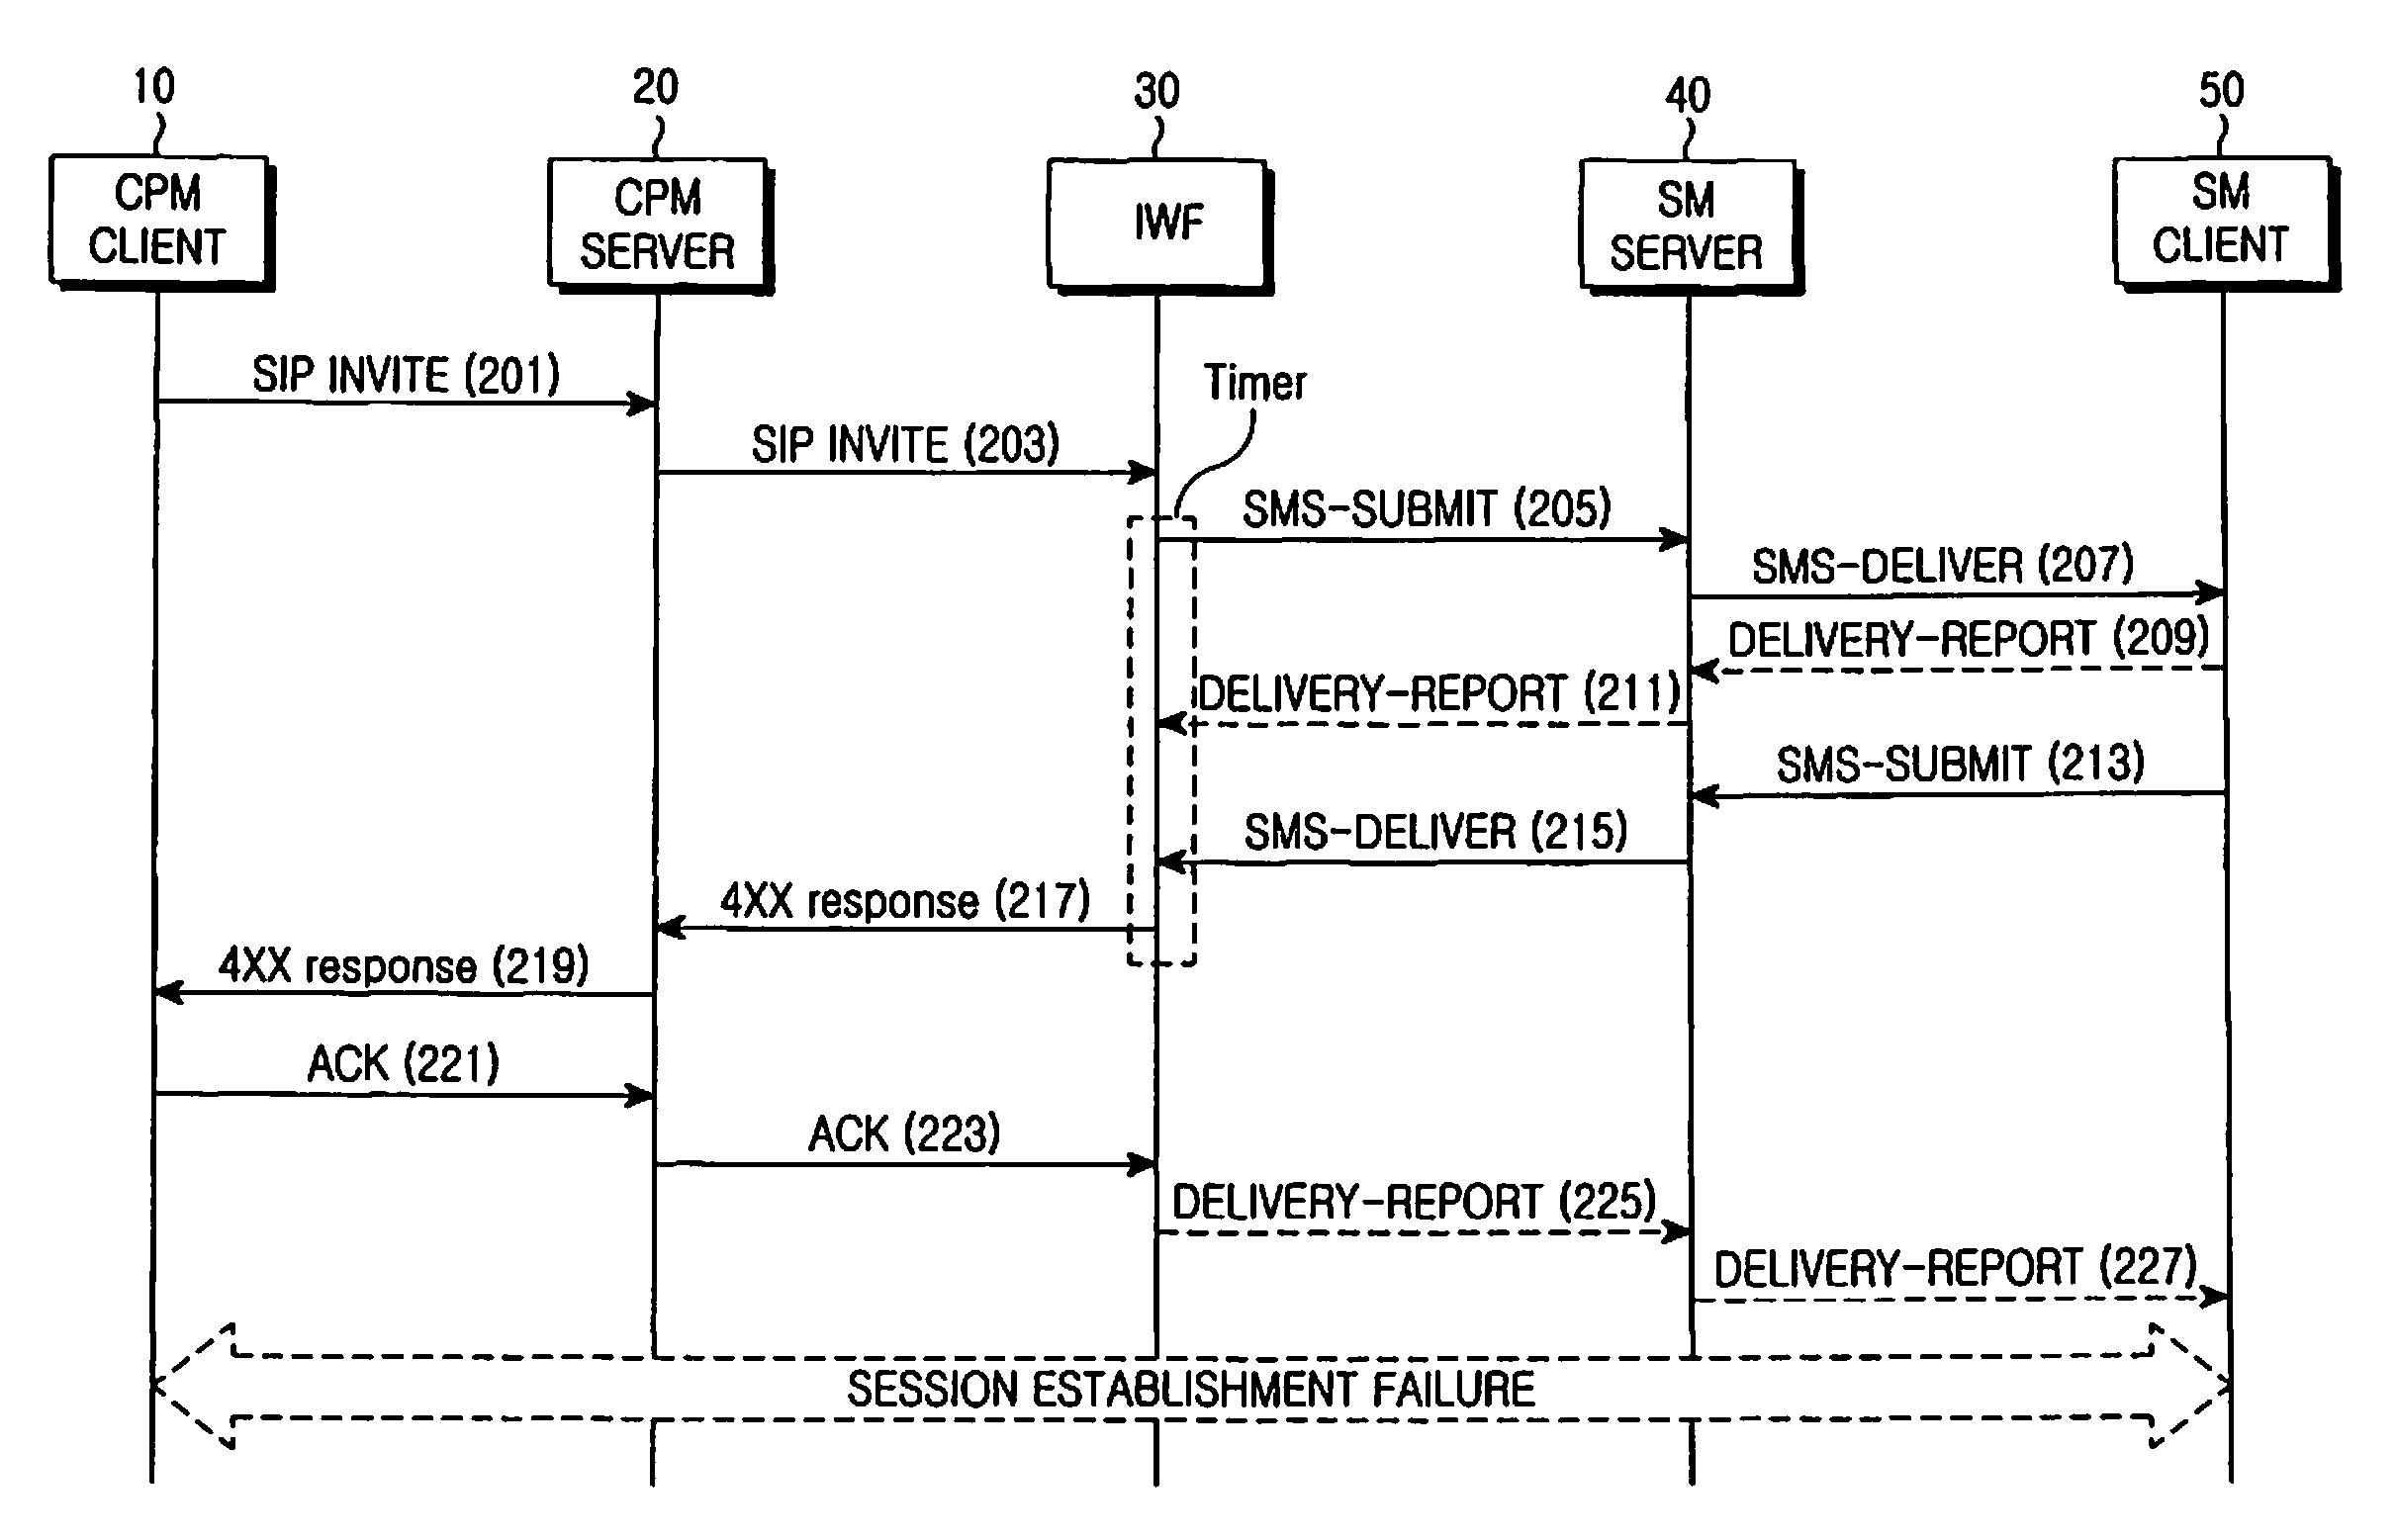 Method and system for establishing session for message communication between converged IP messaging service client and short messaging service client